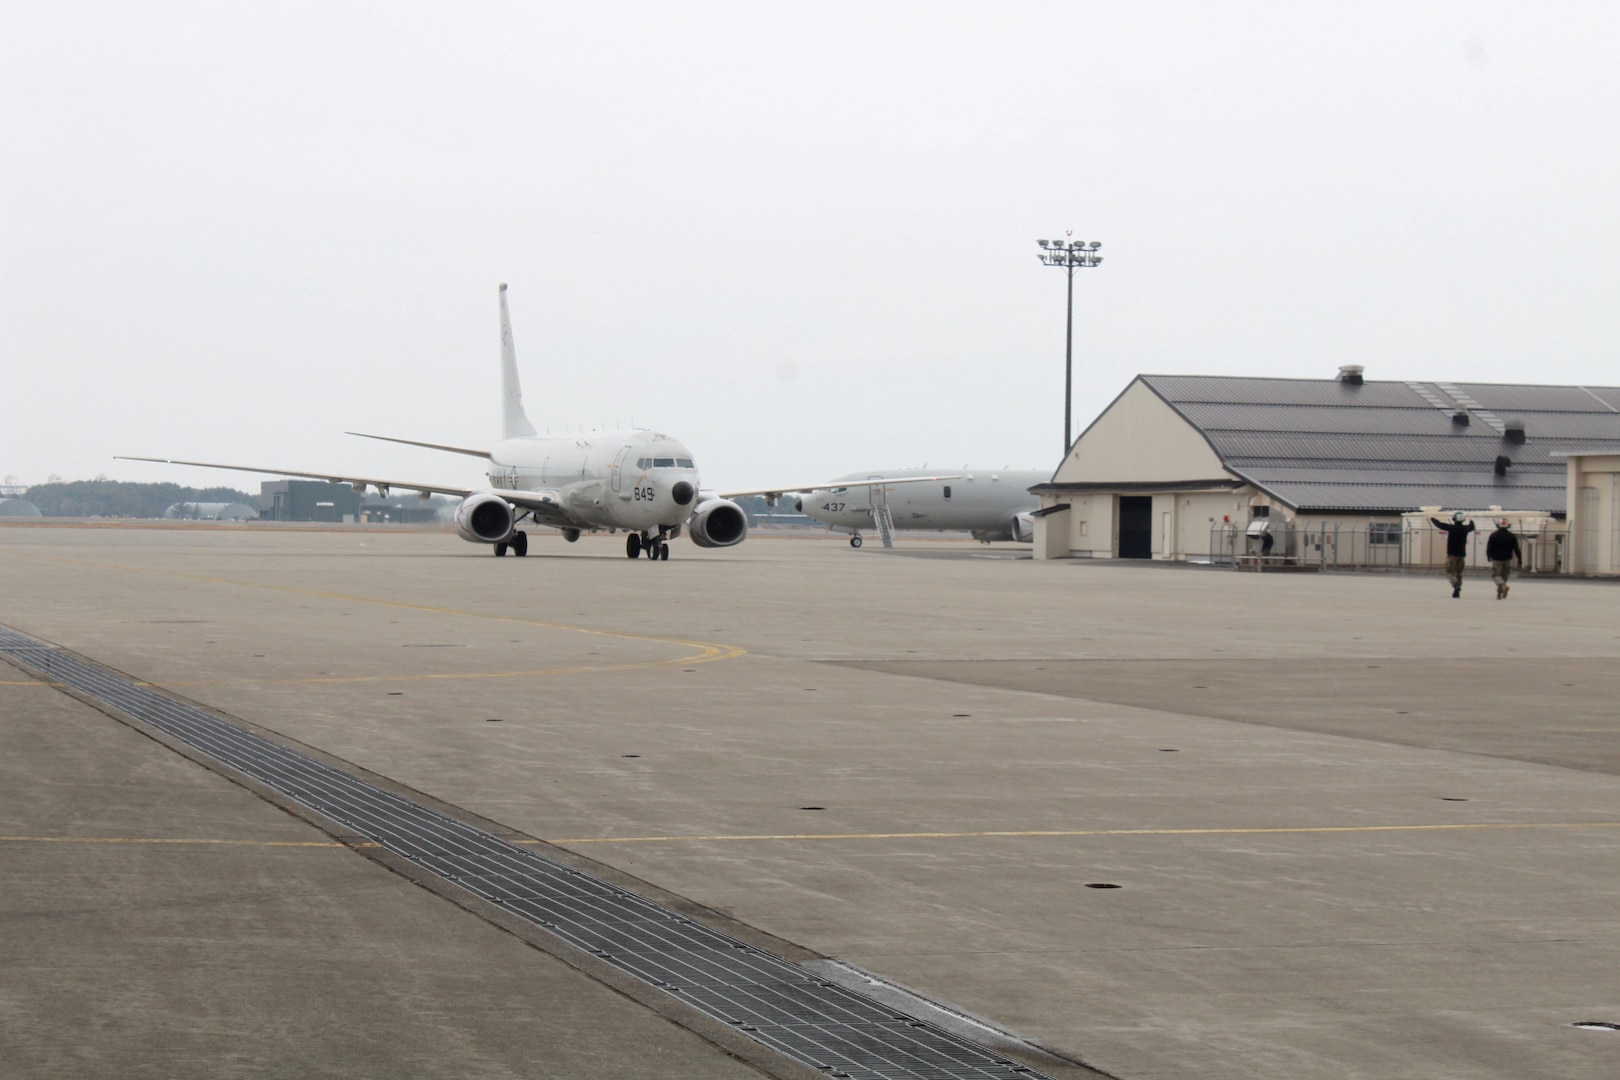 190405-N-VA915-012 MISAWA, JAPAN (April 5, 2019) A P-8A Poseidon aircraft assigned to the “Fighting Tigers” of Patrol Squadron (VP) 8, taxis on the flight line of Misawa Air Base. VP-8 is deployed to the U.S. 7th Fleet (C7F) area of operations conducting maritime patrol and reconnaissance operations in support of Commander, Task Force 72, C7F, and U.S. Pacific Command objectives throughout the Indo-Asia Pacific region. (U.S. Navy photo by Mass Communication Specialist 1st Class Jerome D. Johnson)